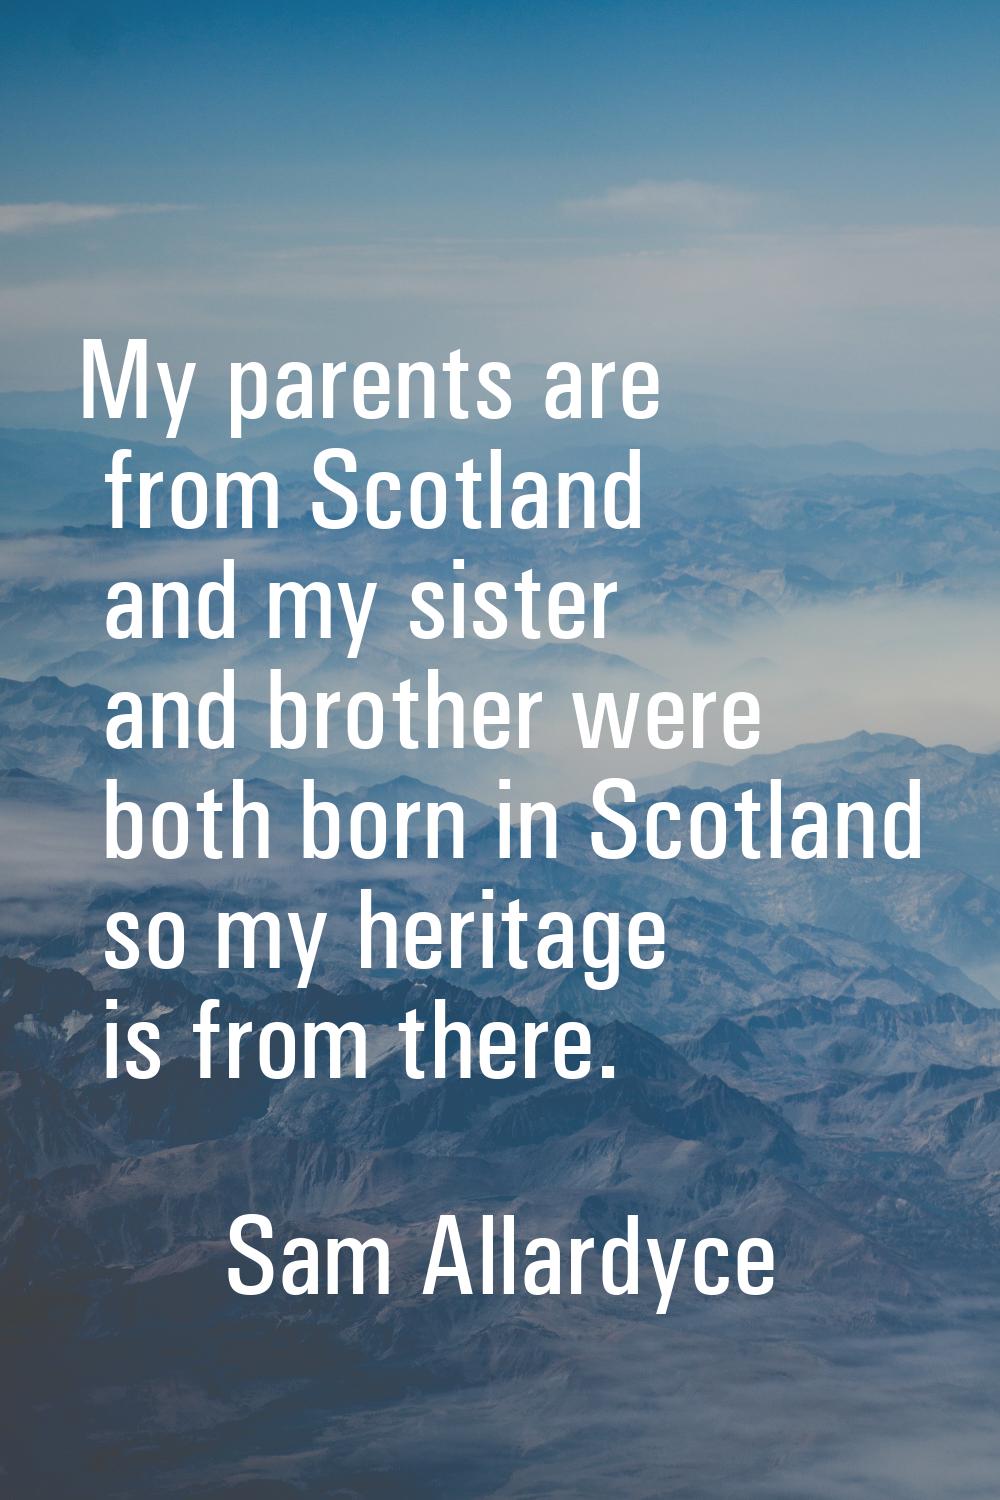 My parents are from Scotland and my sister and brother were both born in Scotland so my heritage is